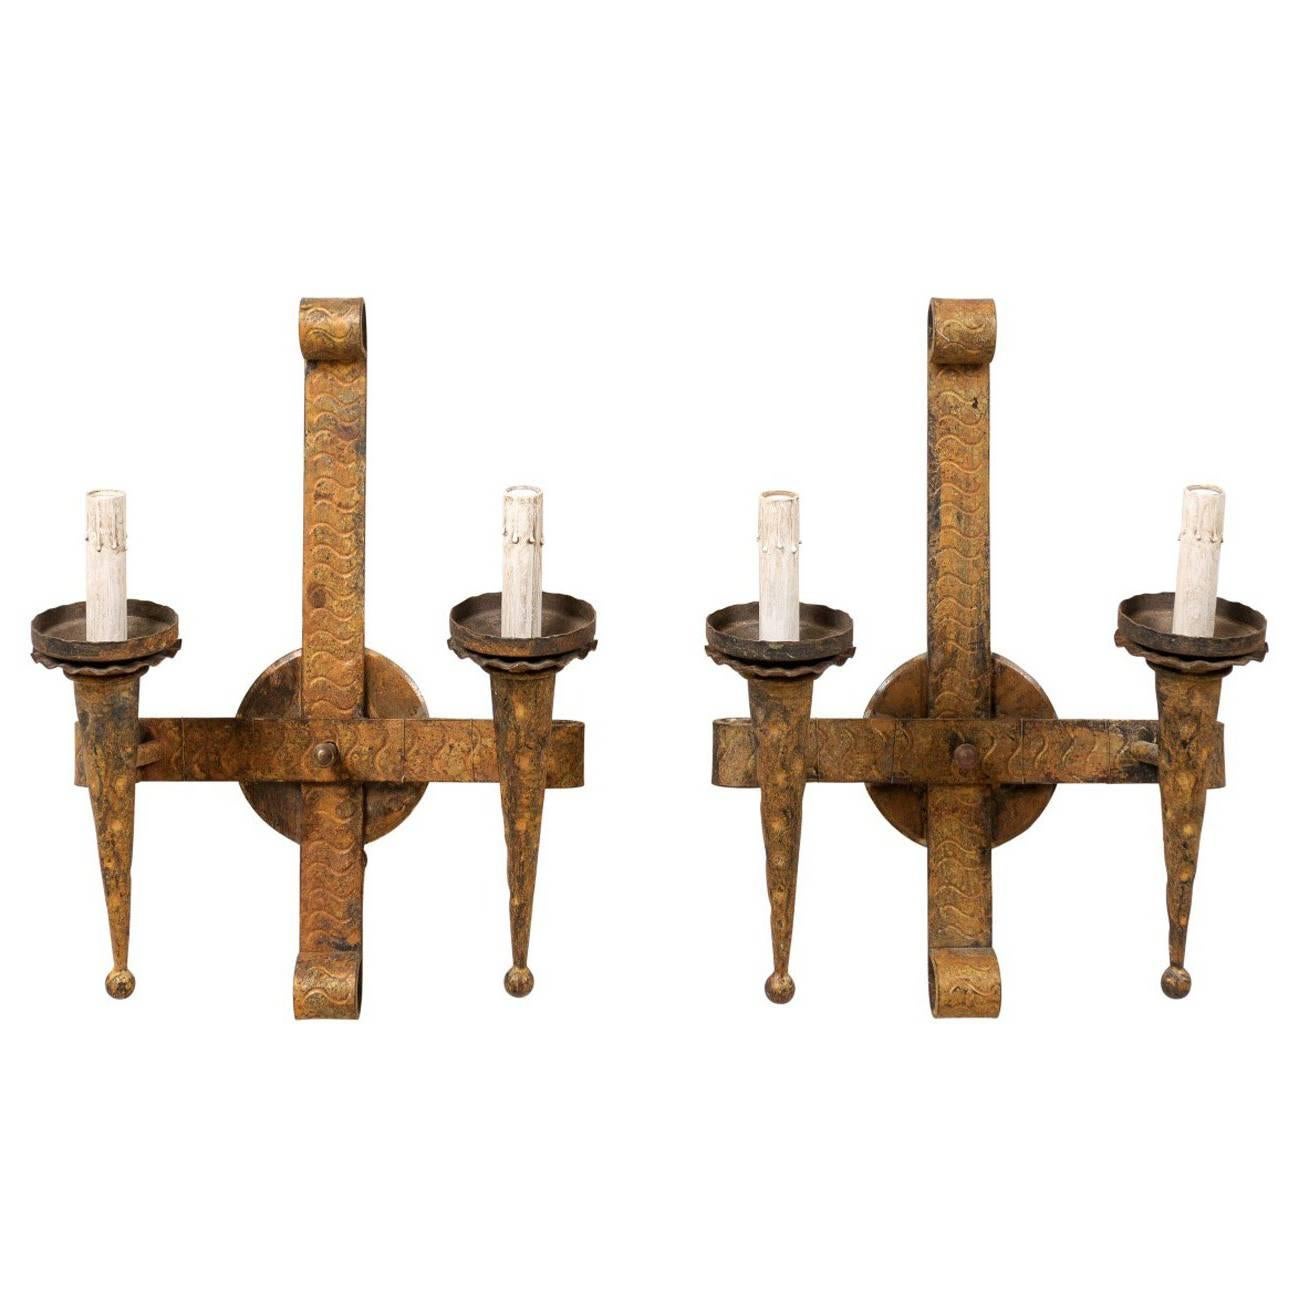 Pair of French Torch Style Gilt Hammered Iron Sconces with Scroll at Top For Sale